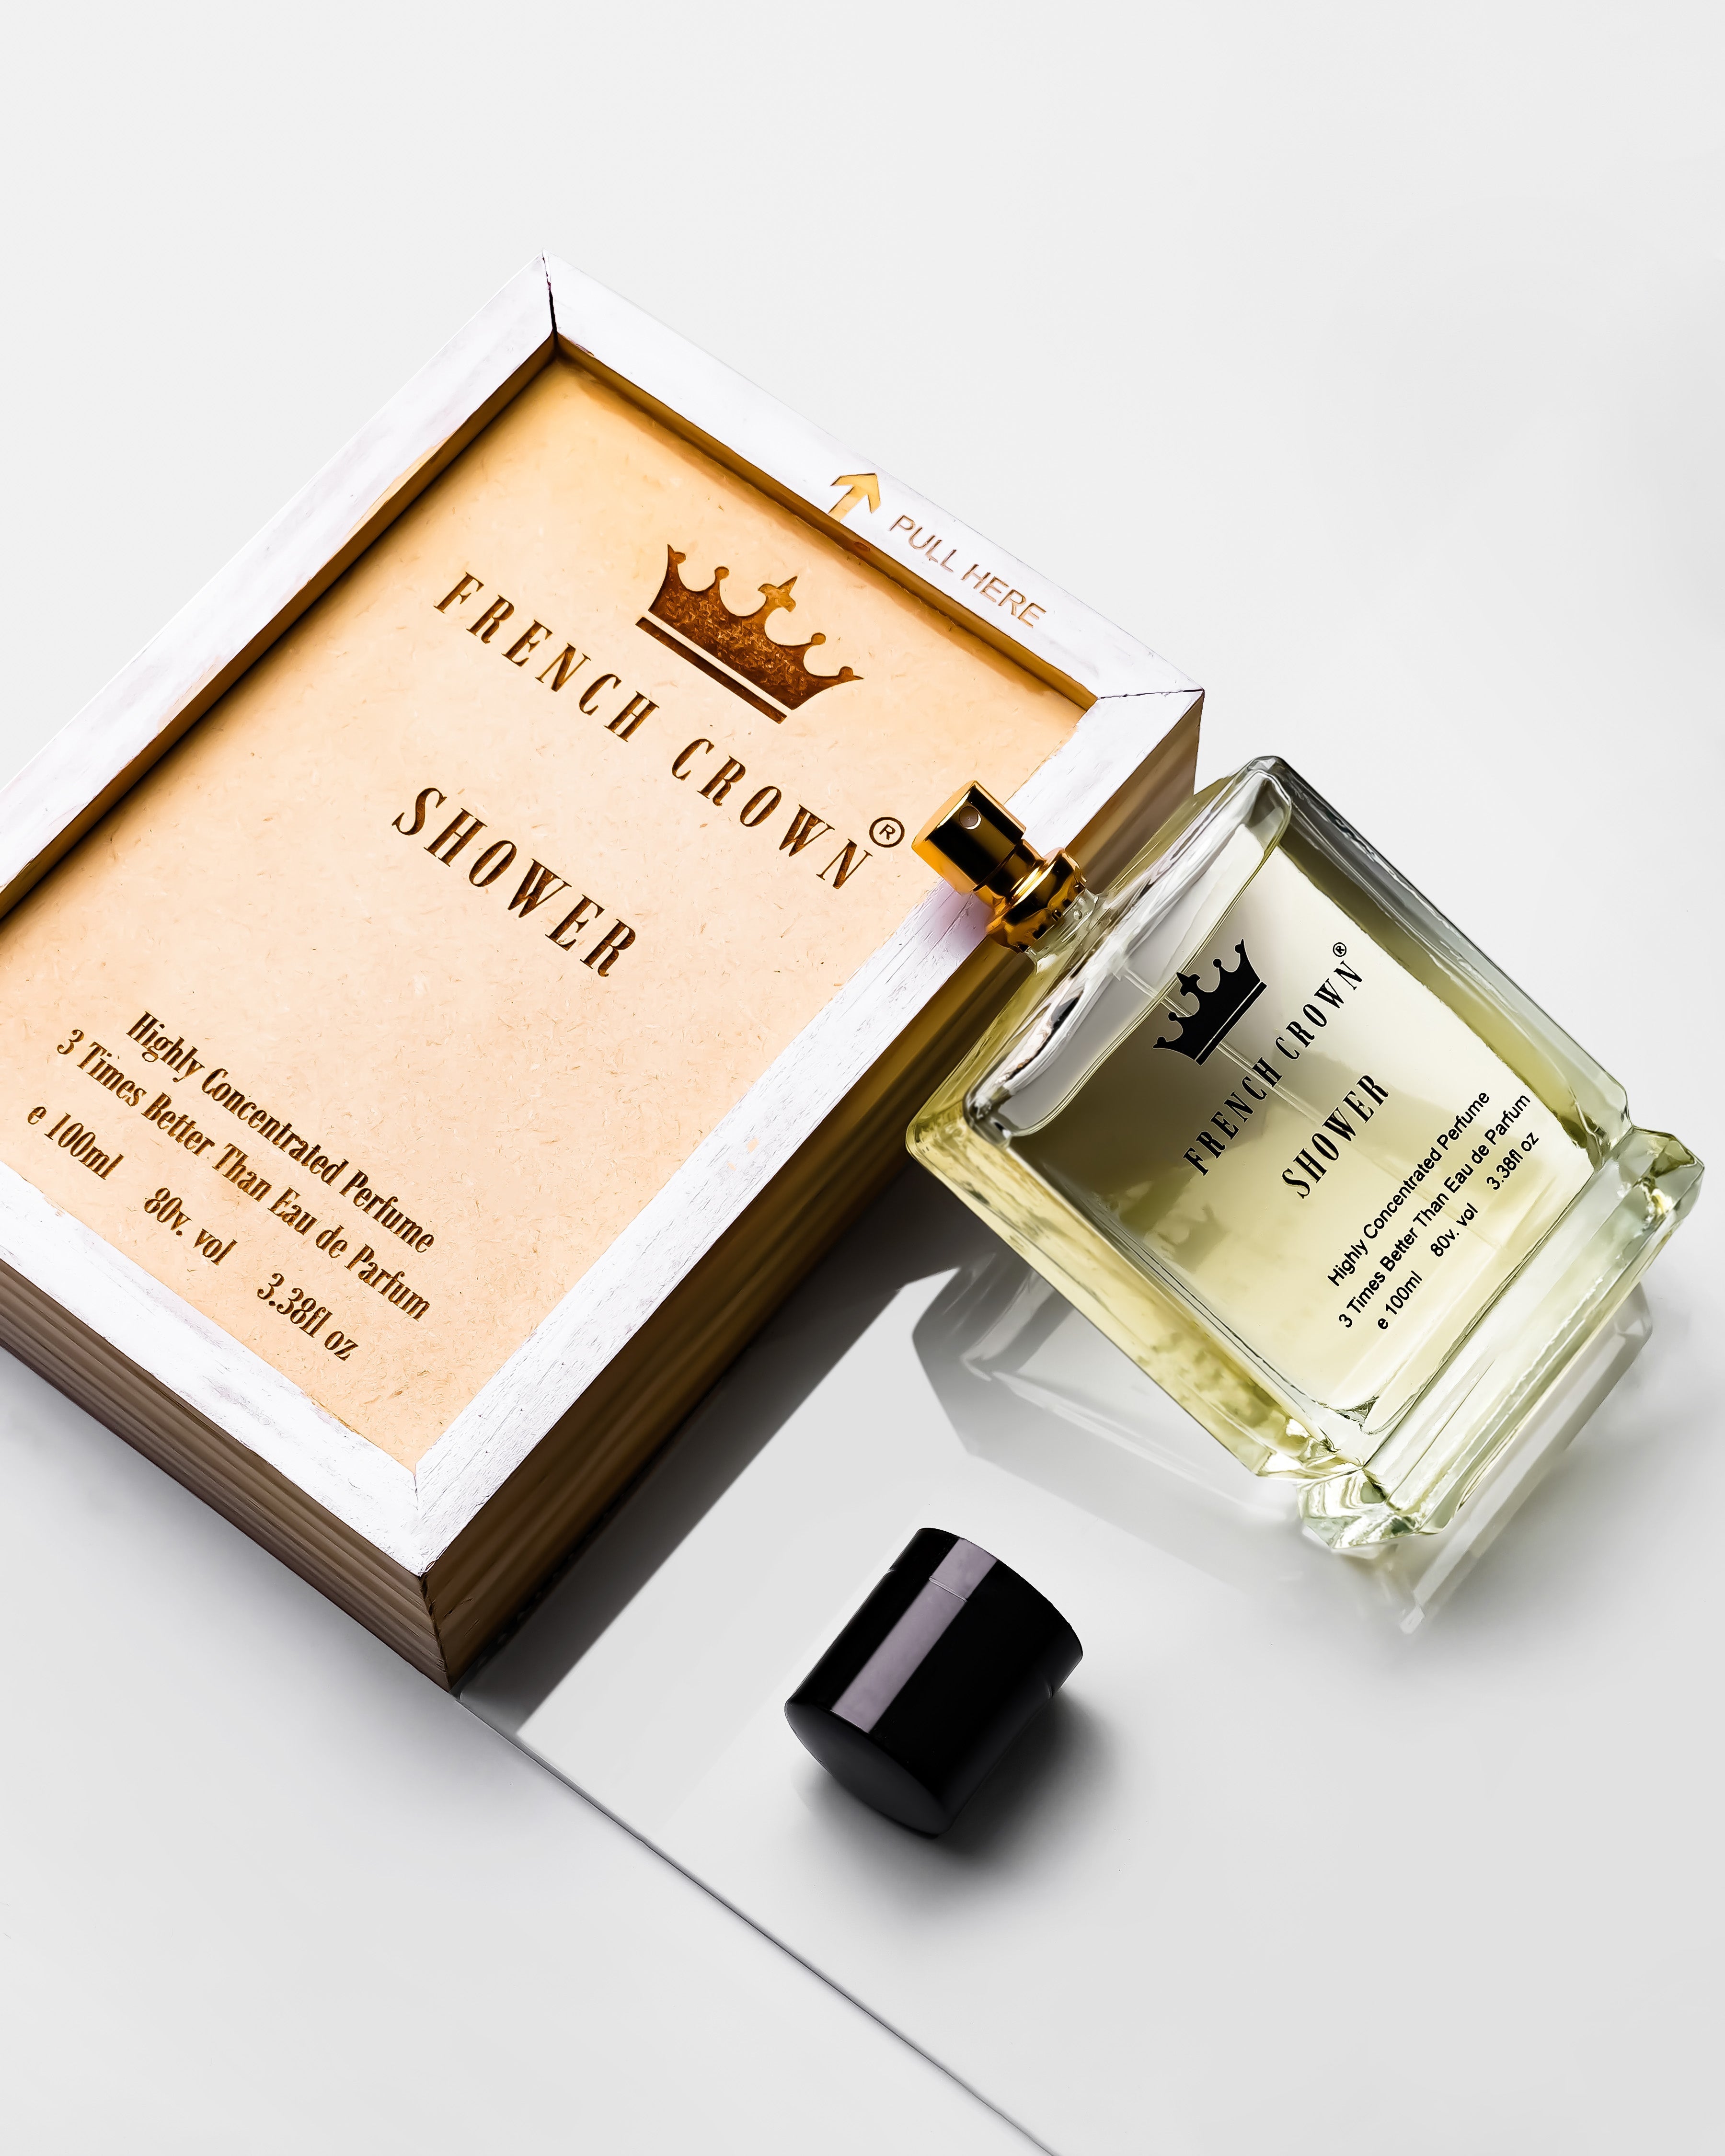 French Crown Shower Perfume